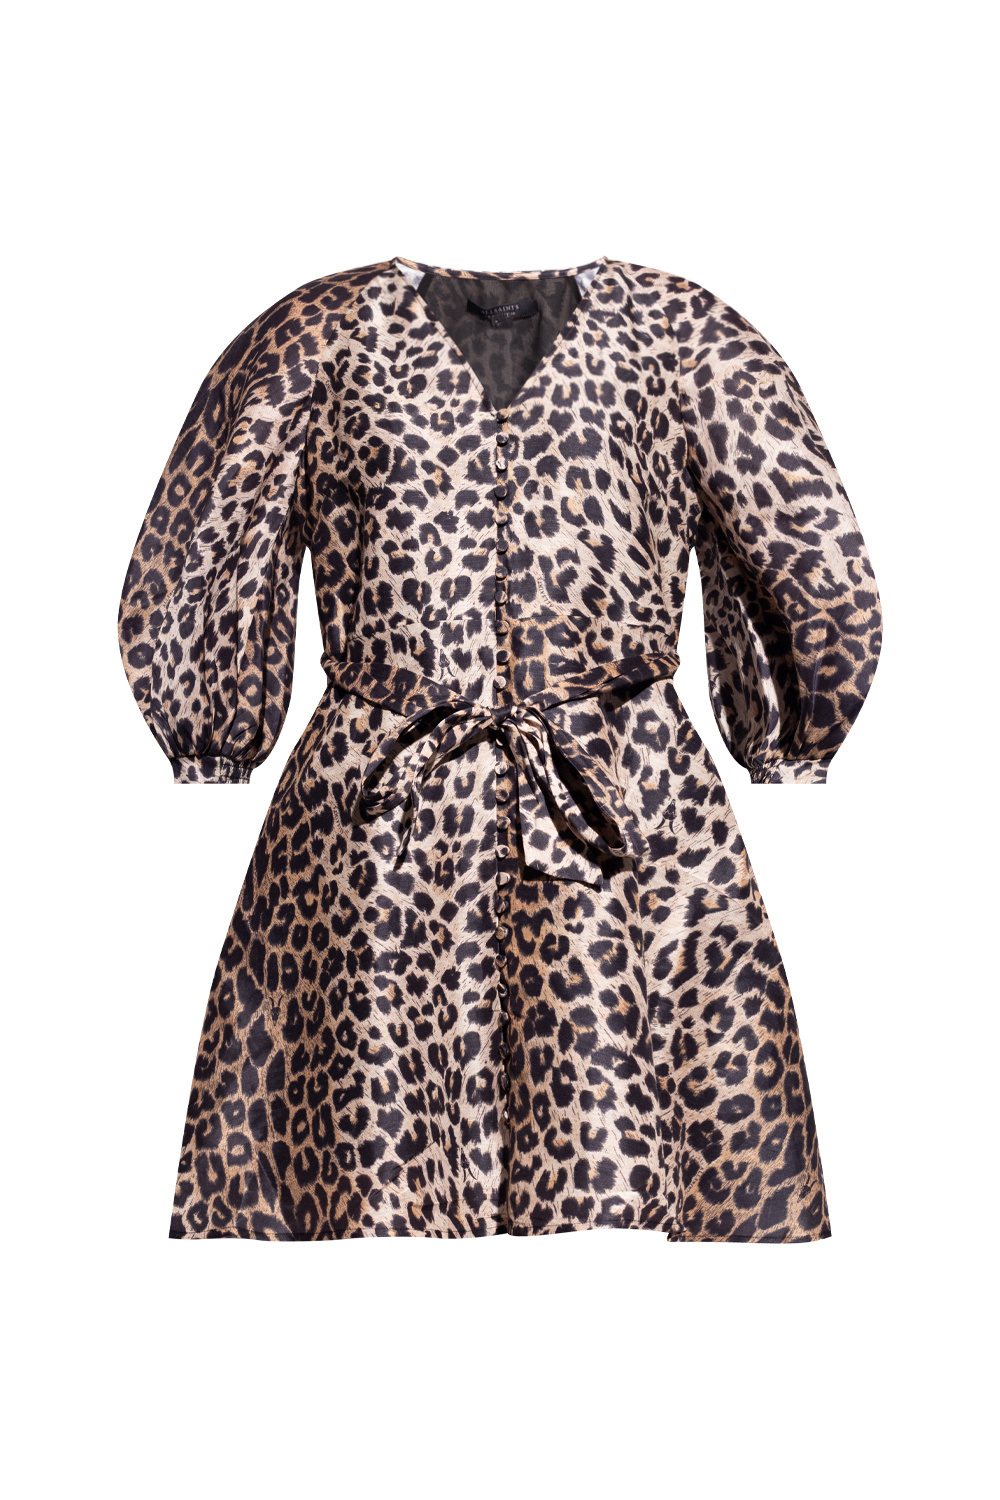 How to Look Fab in a Leopard Wrap Dress 